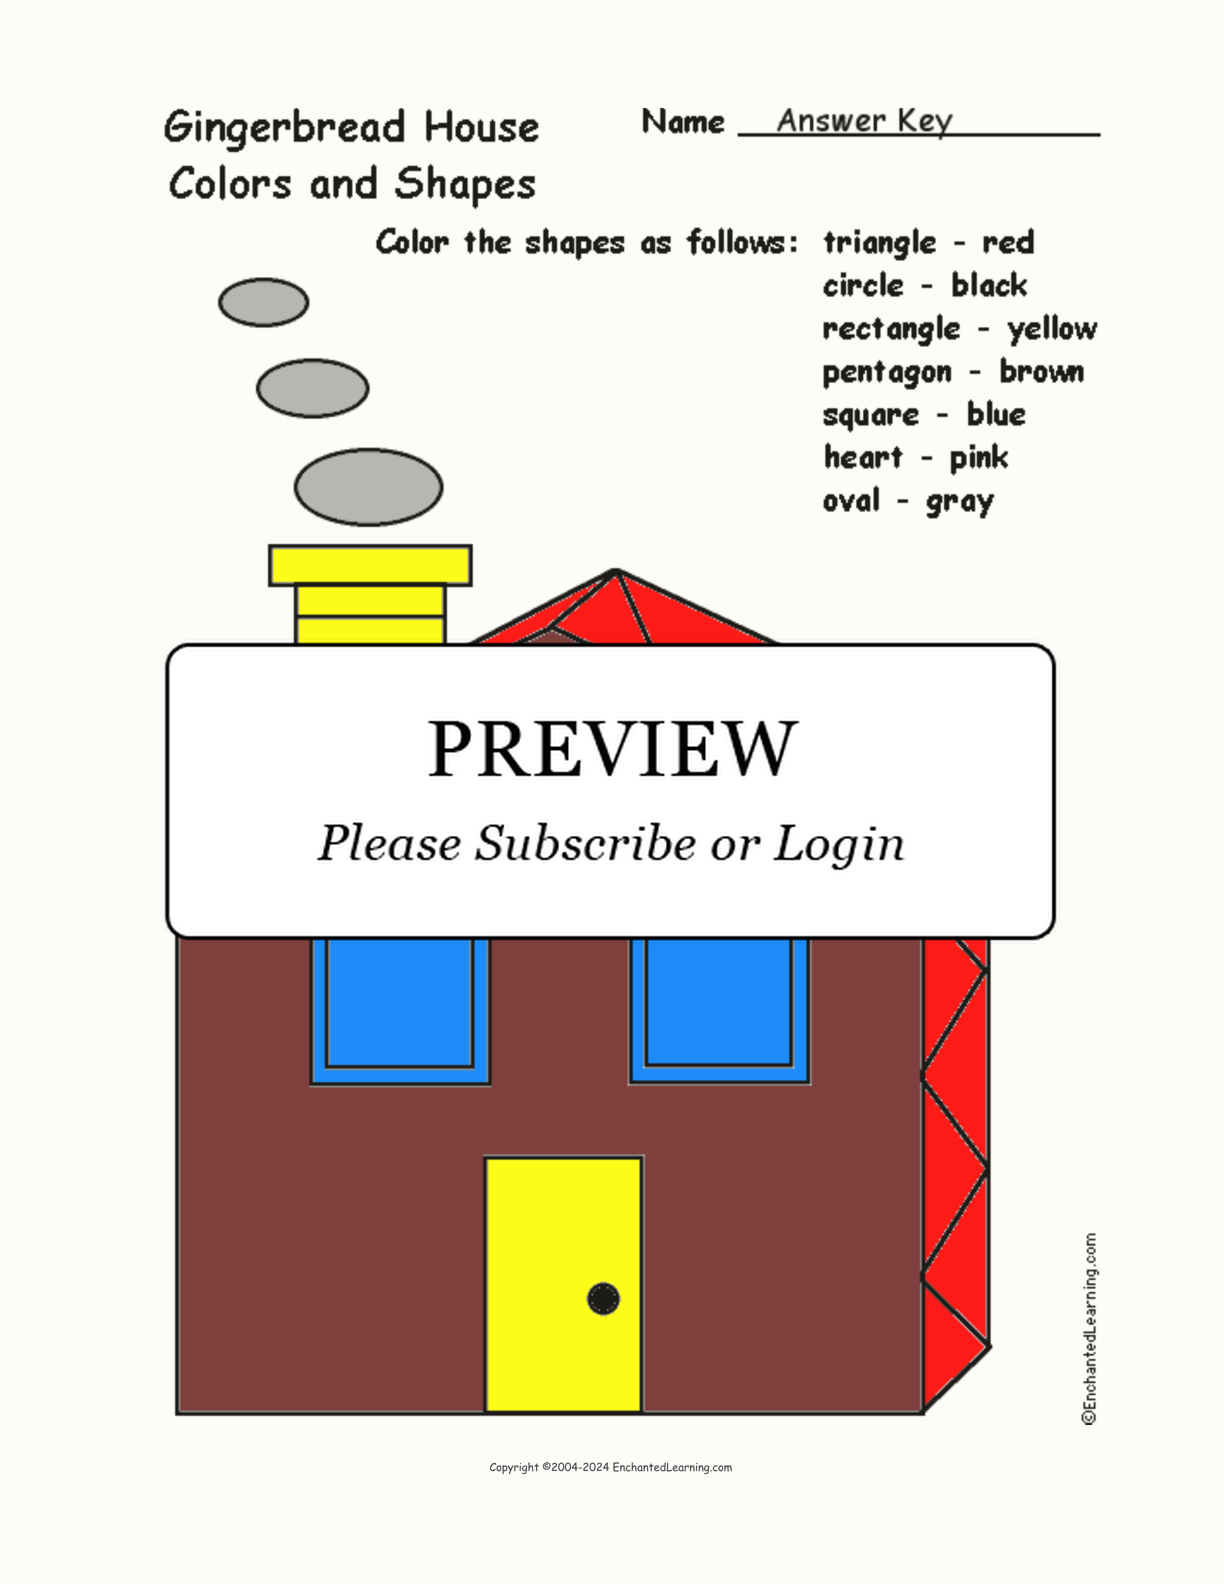 Gingerbread House: Colors and Shapes interactive worksheet page 2